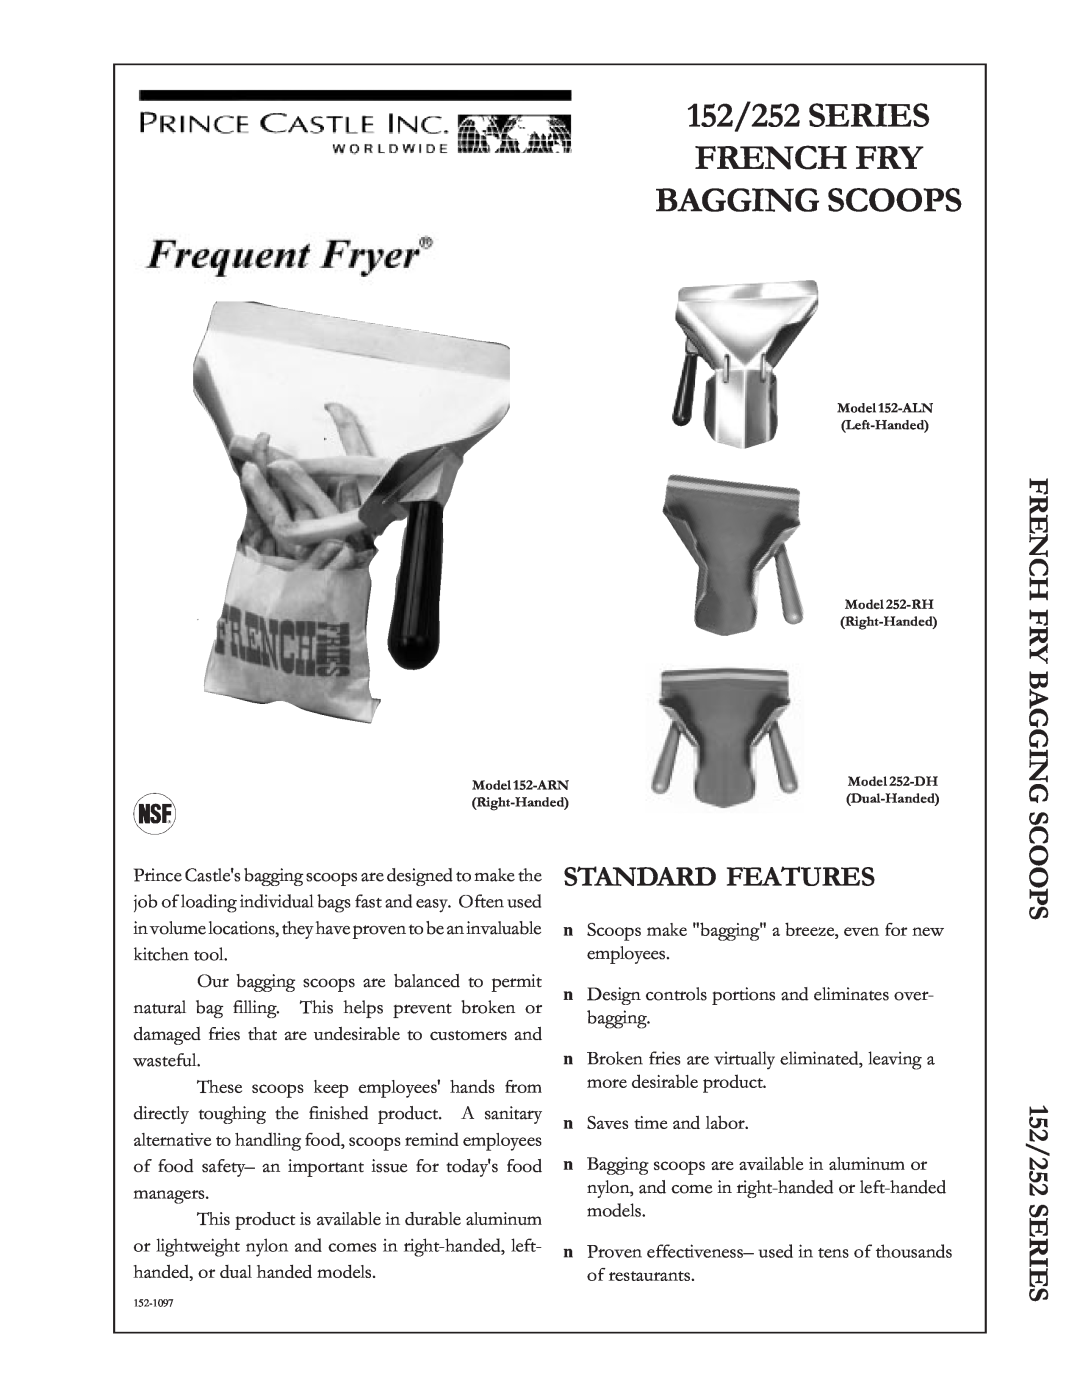 Prince Castle 152/252 Series manual 152/252 SERIES FRENCH FRY BAGGING SCOOPS, French Fry Bagging, Standard Features 